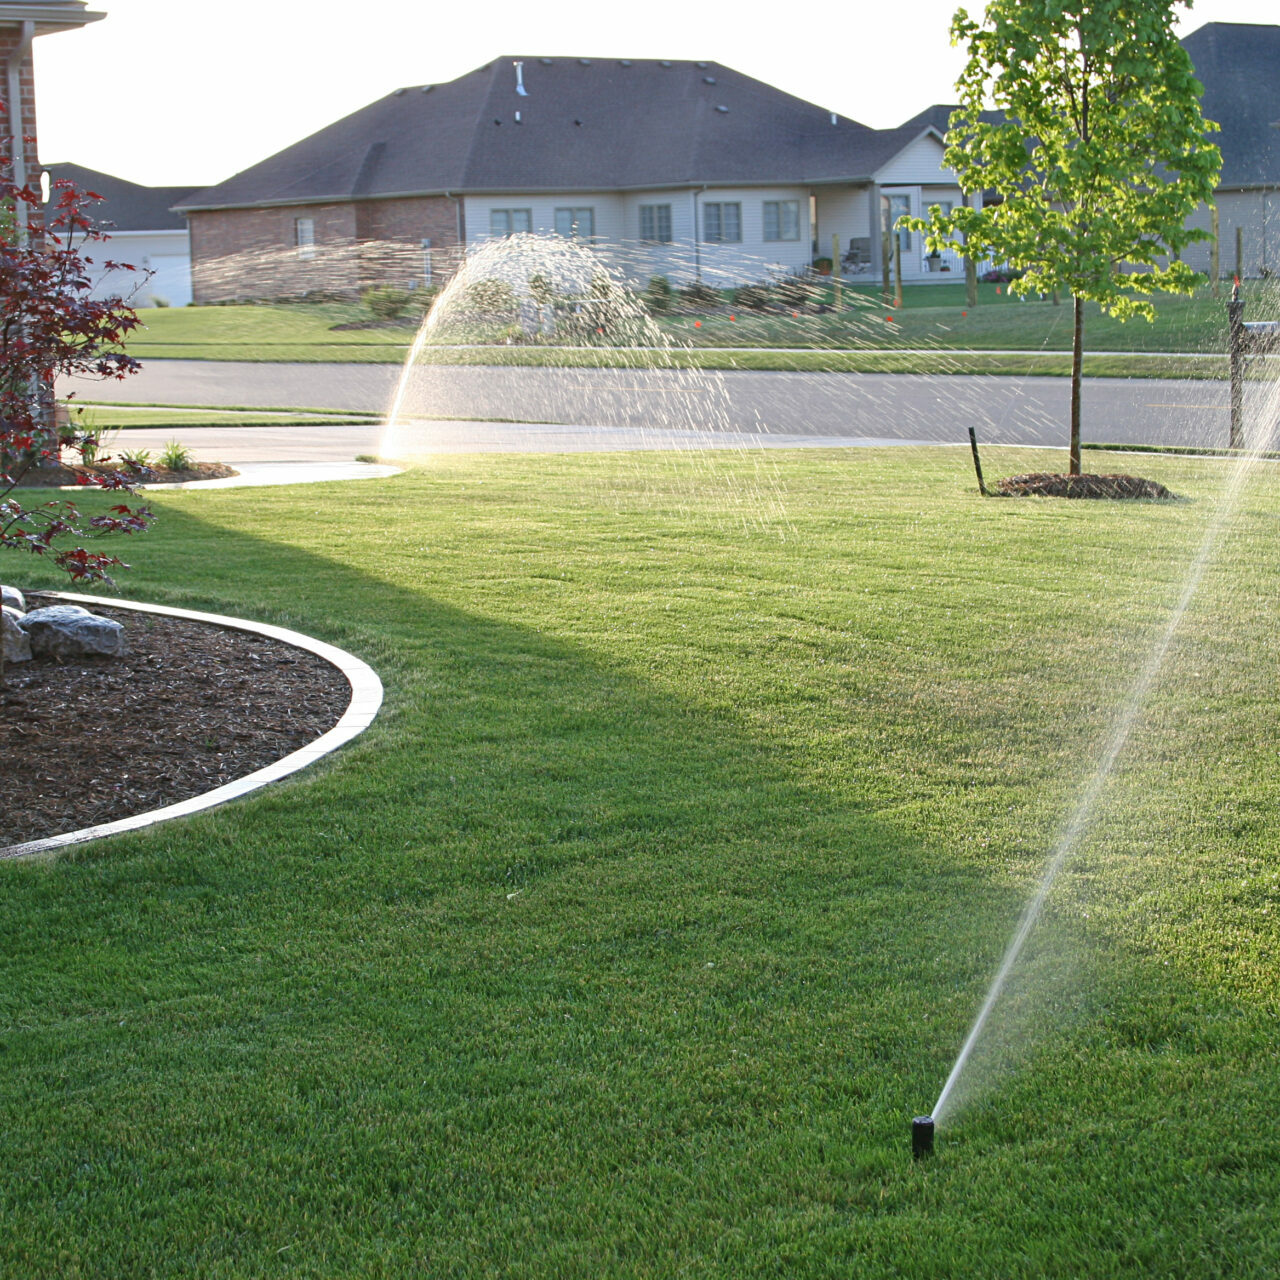 Well-maintained lawn with sprinklers